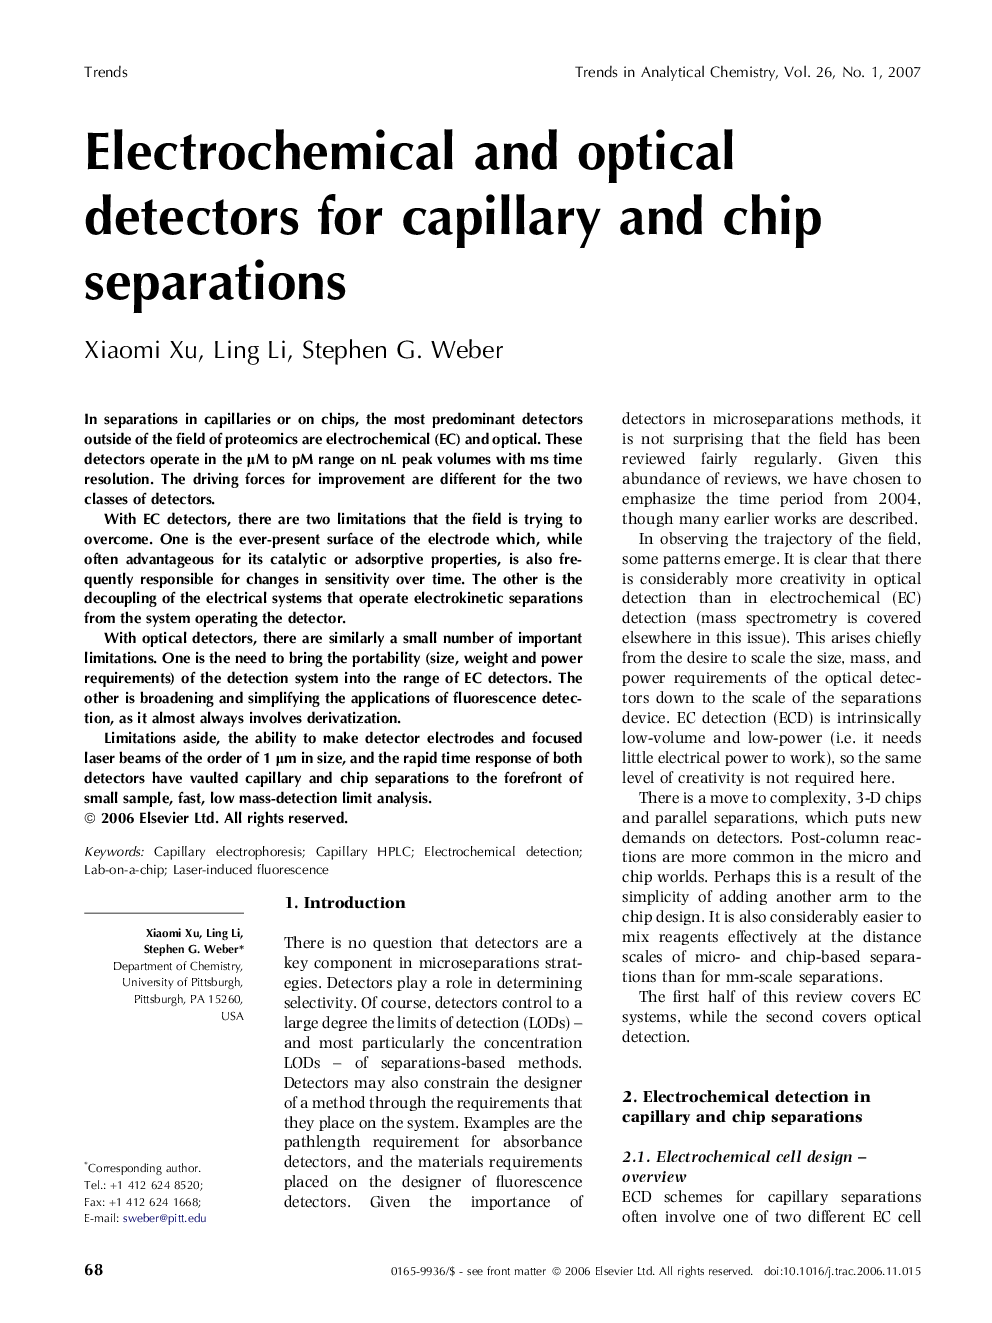 Electrochemical and optical detectors for capillary and chip separations